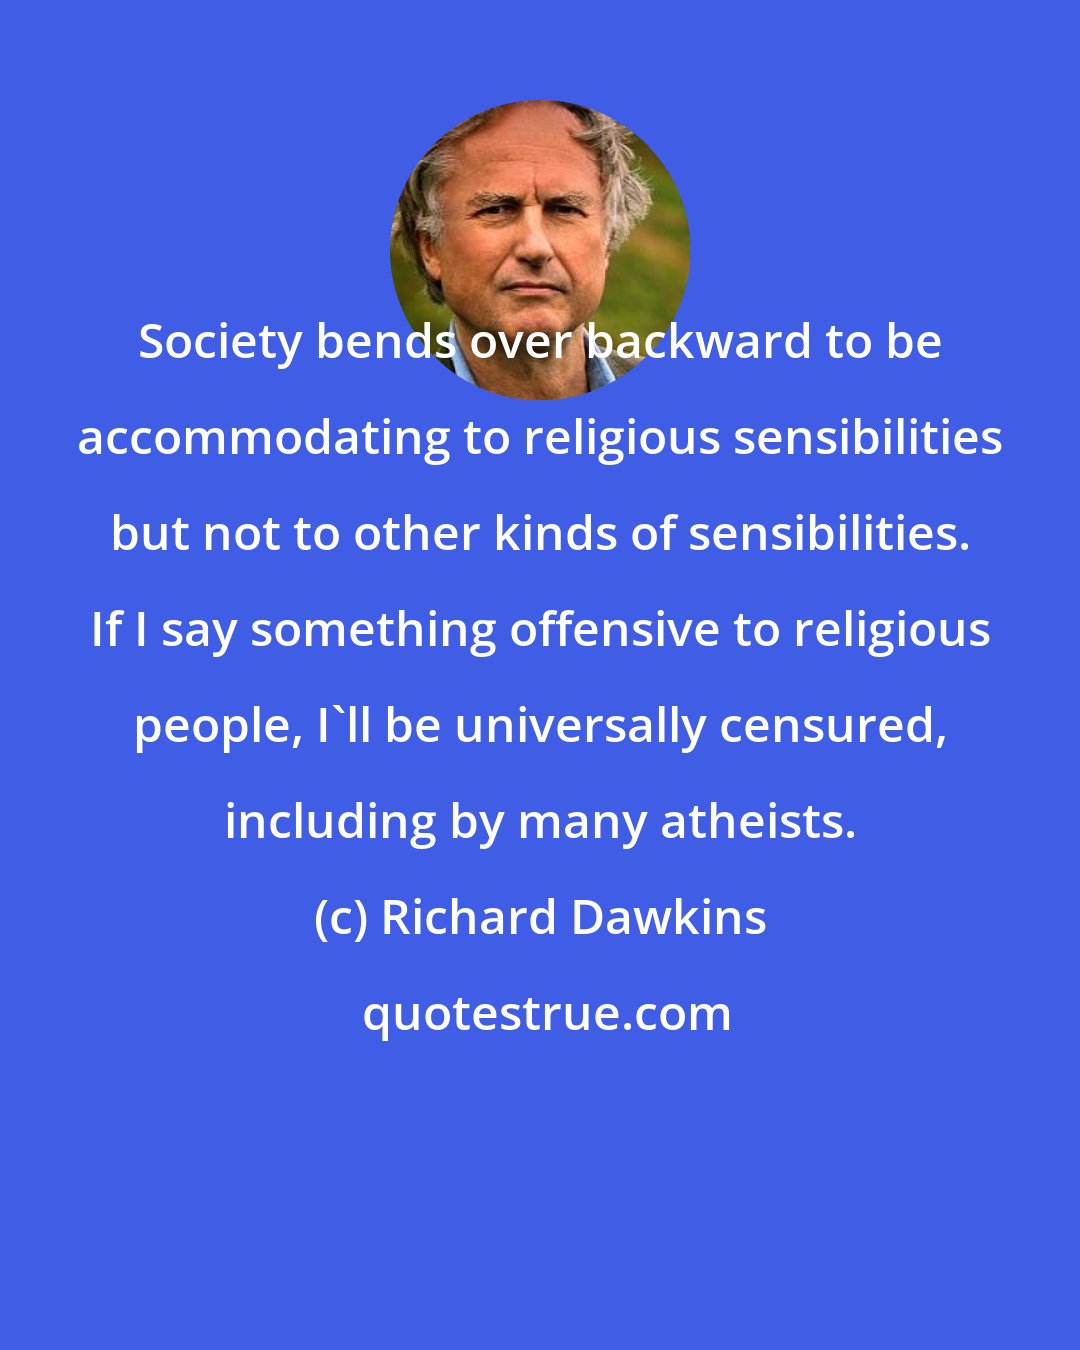 Richard Dawkins: Society bends over backward to be accommodating to religious sensibilities but not to other kinds of sensibilities. If I say something offensive to religious people, I'll be universally censured, including by many atheists.